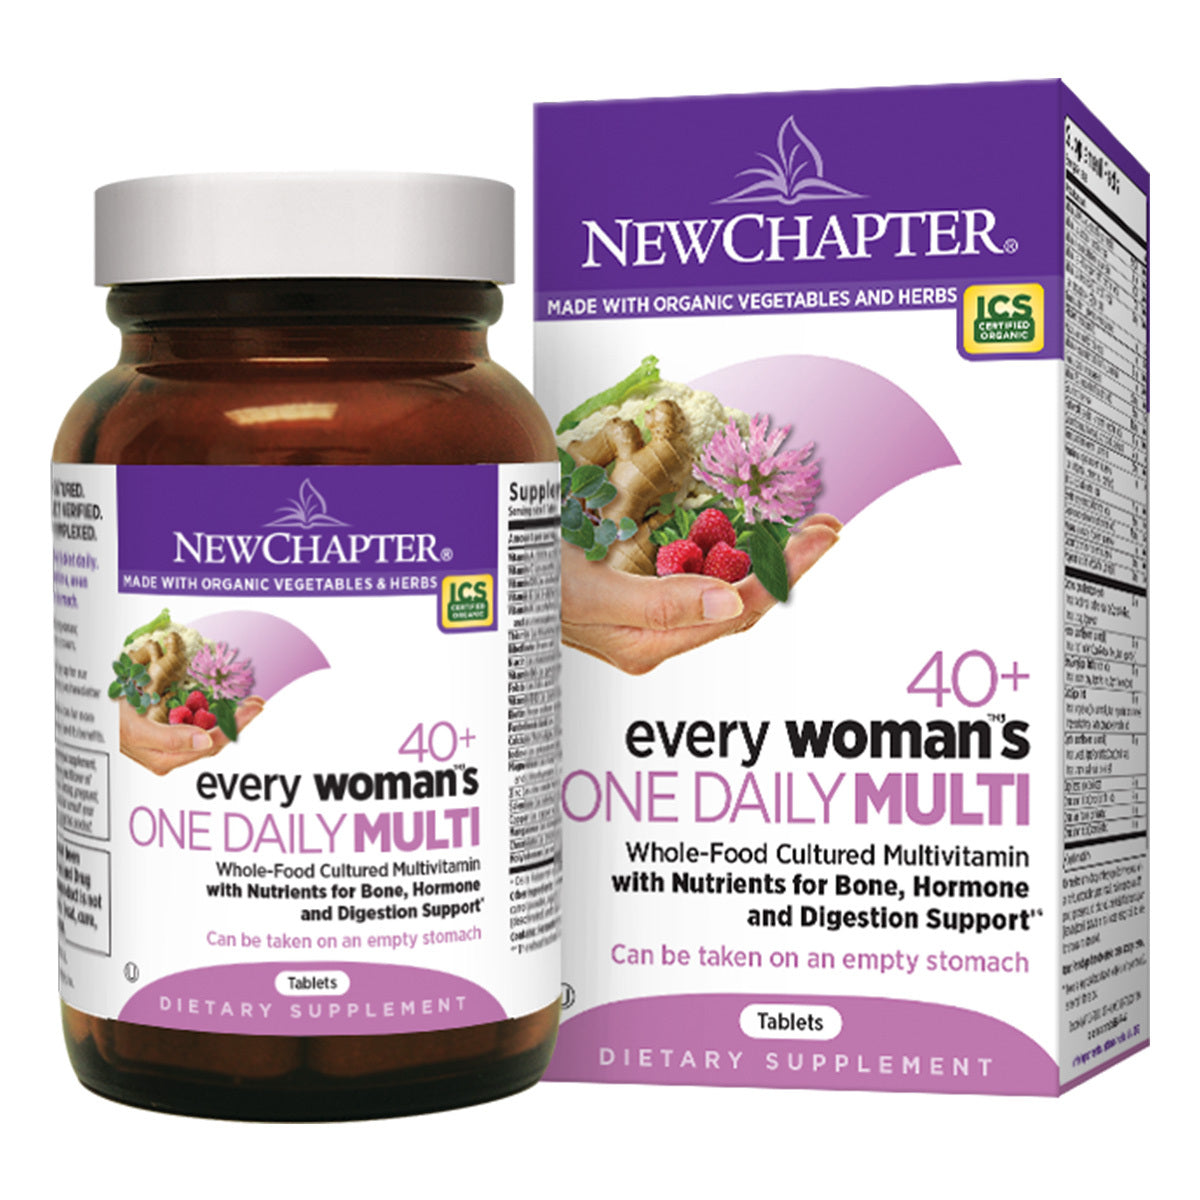 Primary image of 40+ Every Woman's One Daily Multivitamin